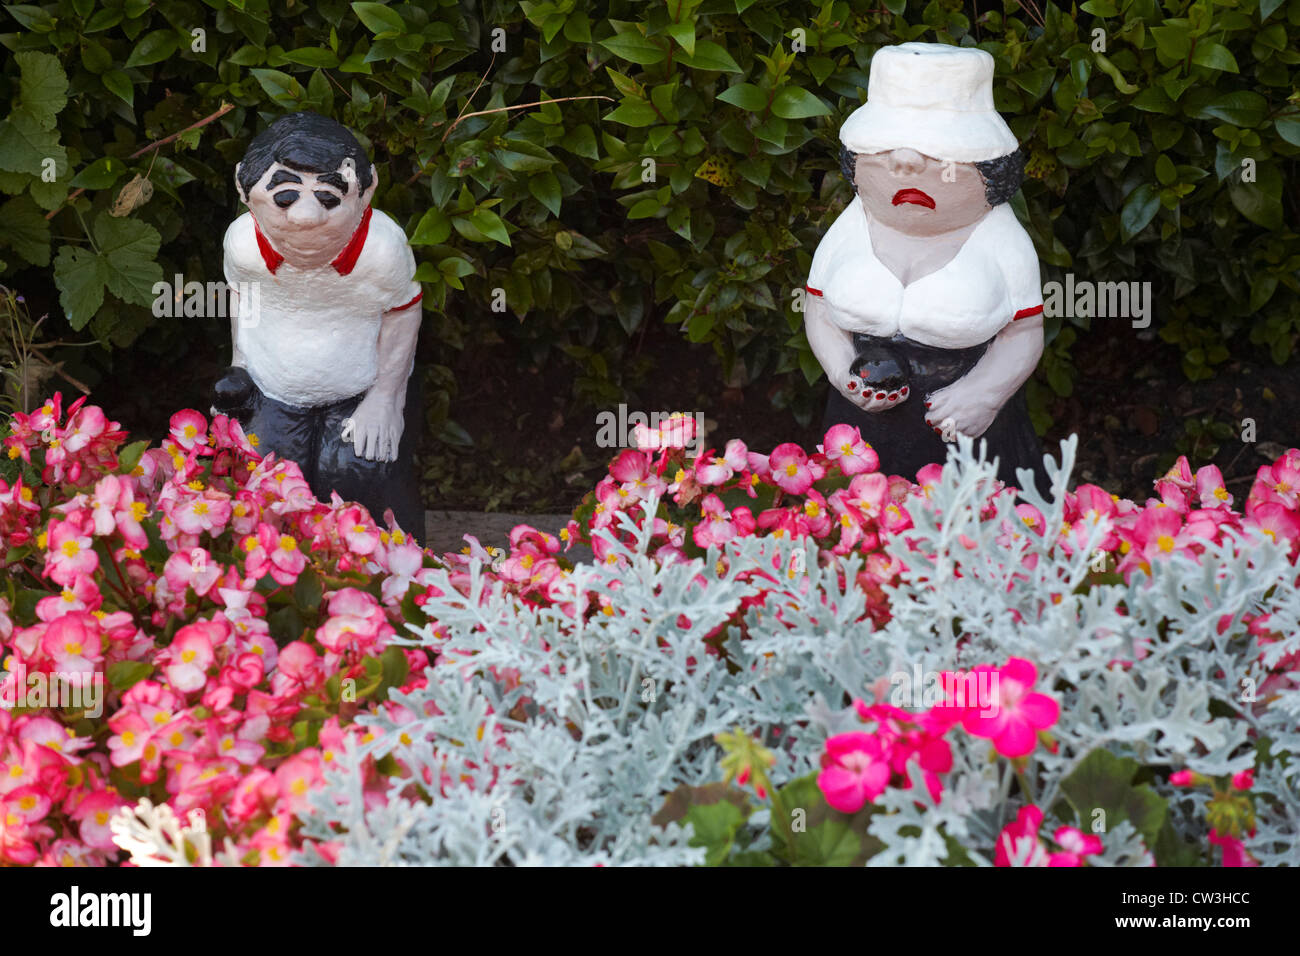 Bowlers garden ornaments positioned in flower bed at Bowling Club Stock Photo